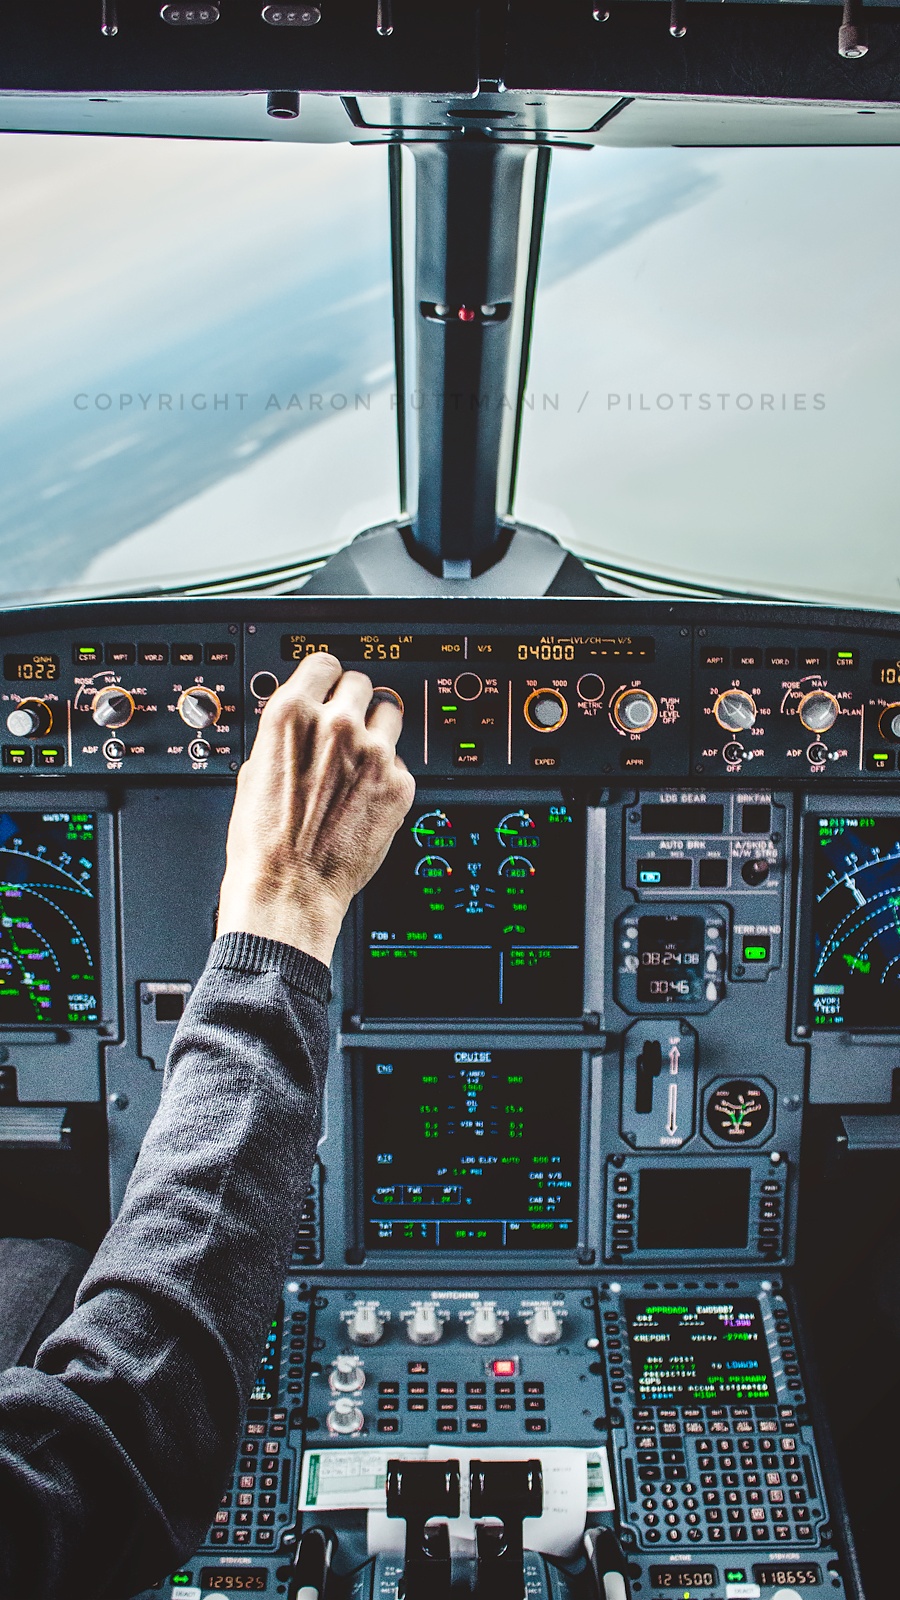 Aircraft wallpapers for your Smartphone (Full-HD)! - Pilotstories